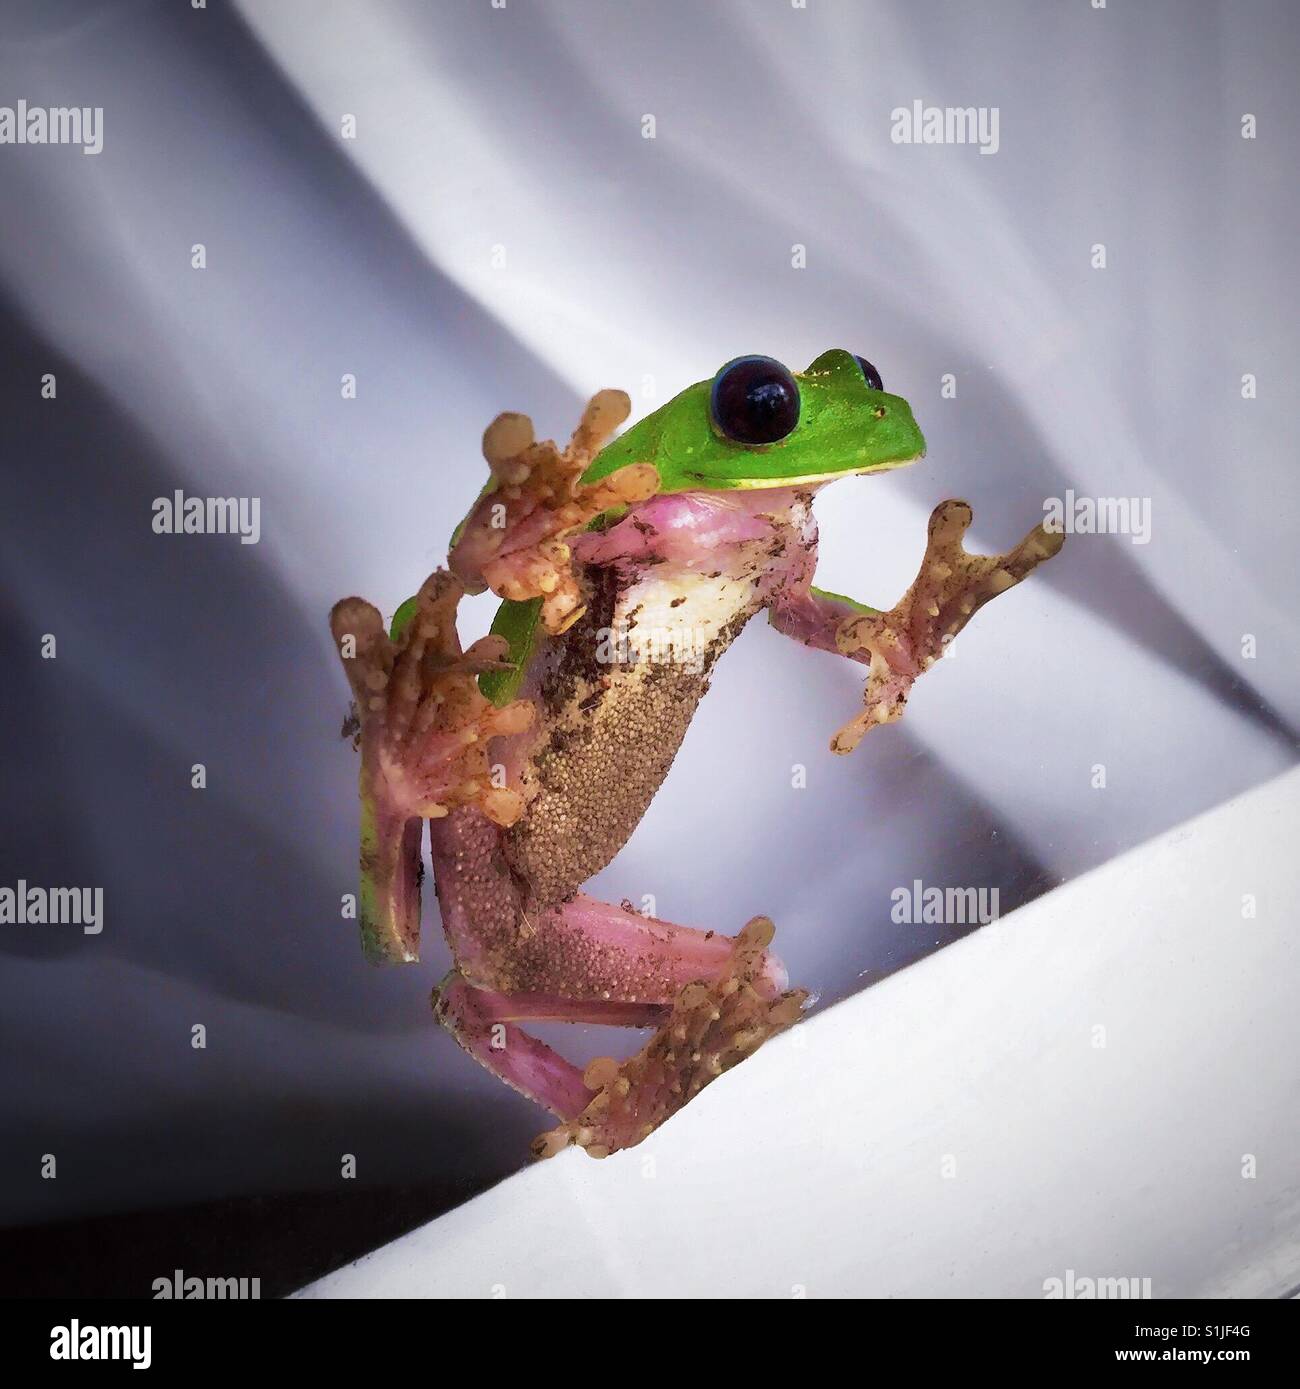 Frog jumping onto a window surrounded by white curtains Stock Photo